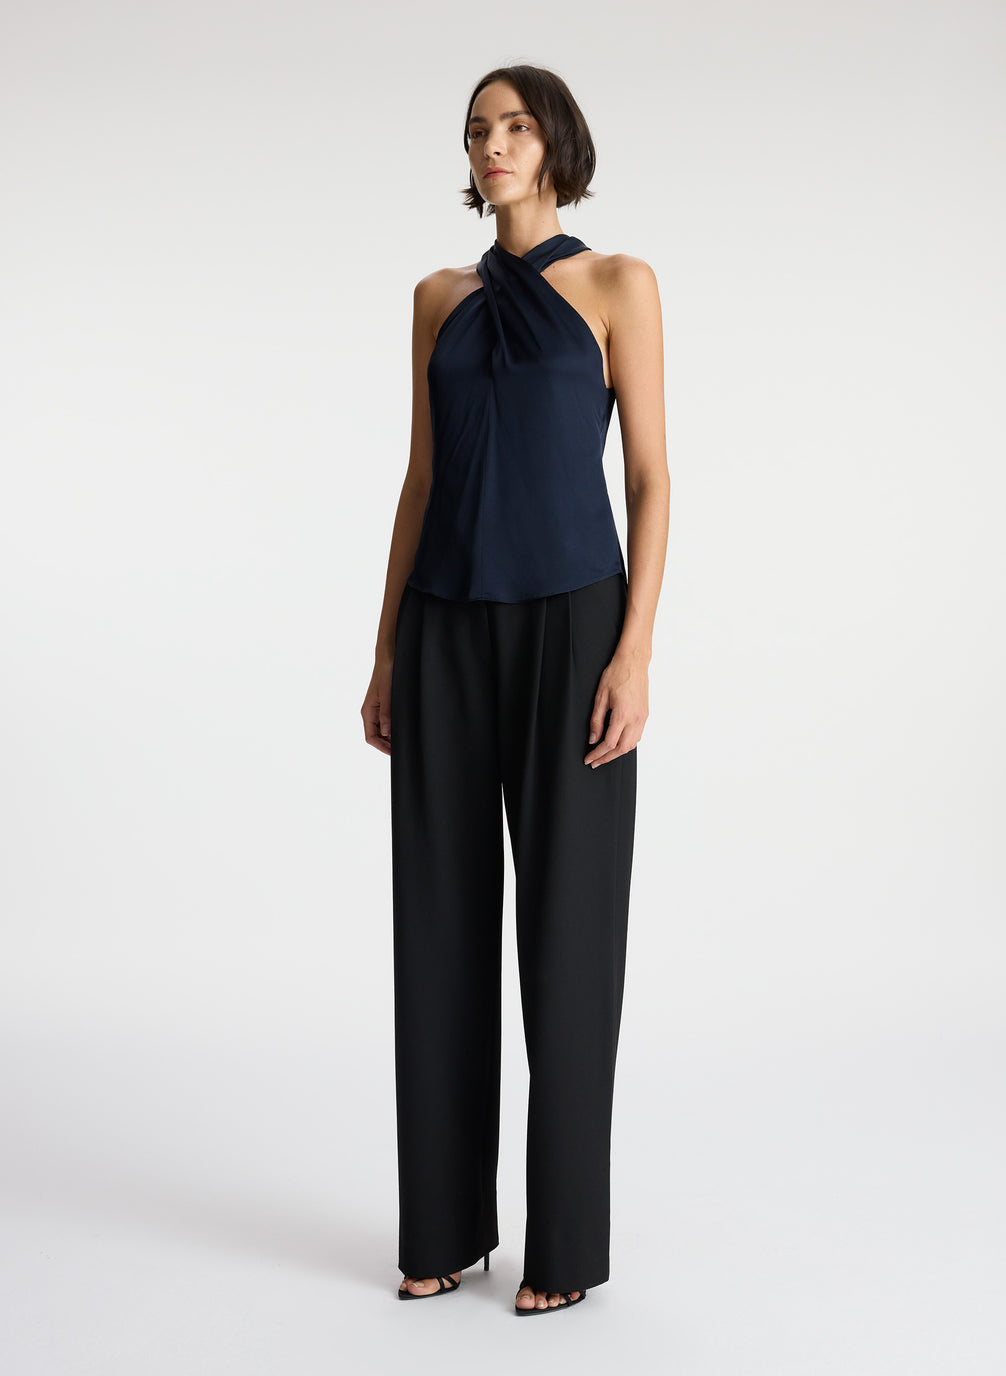 side view of woman wearing navy blue satin halter top with black pants